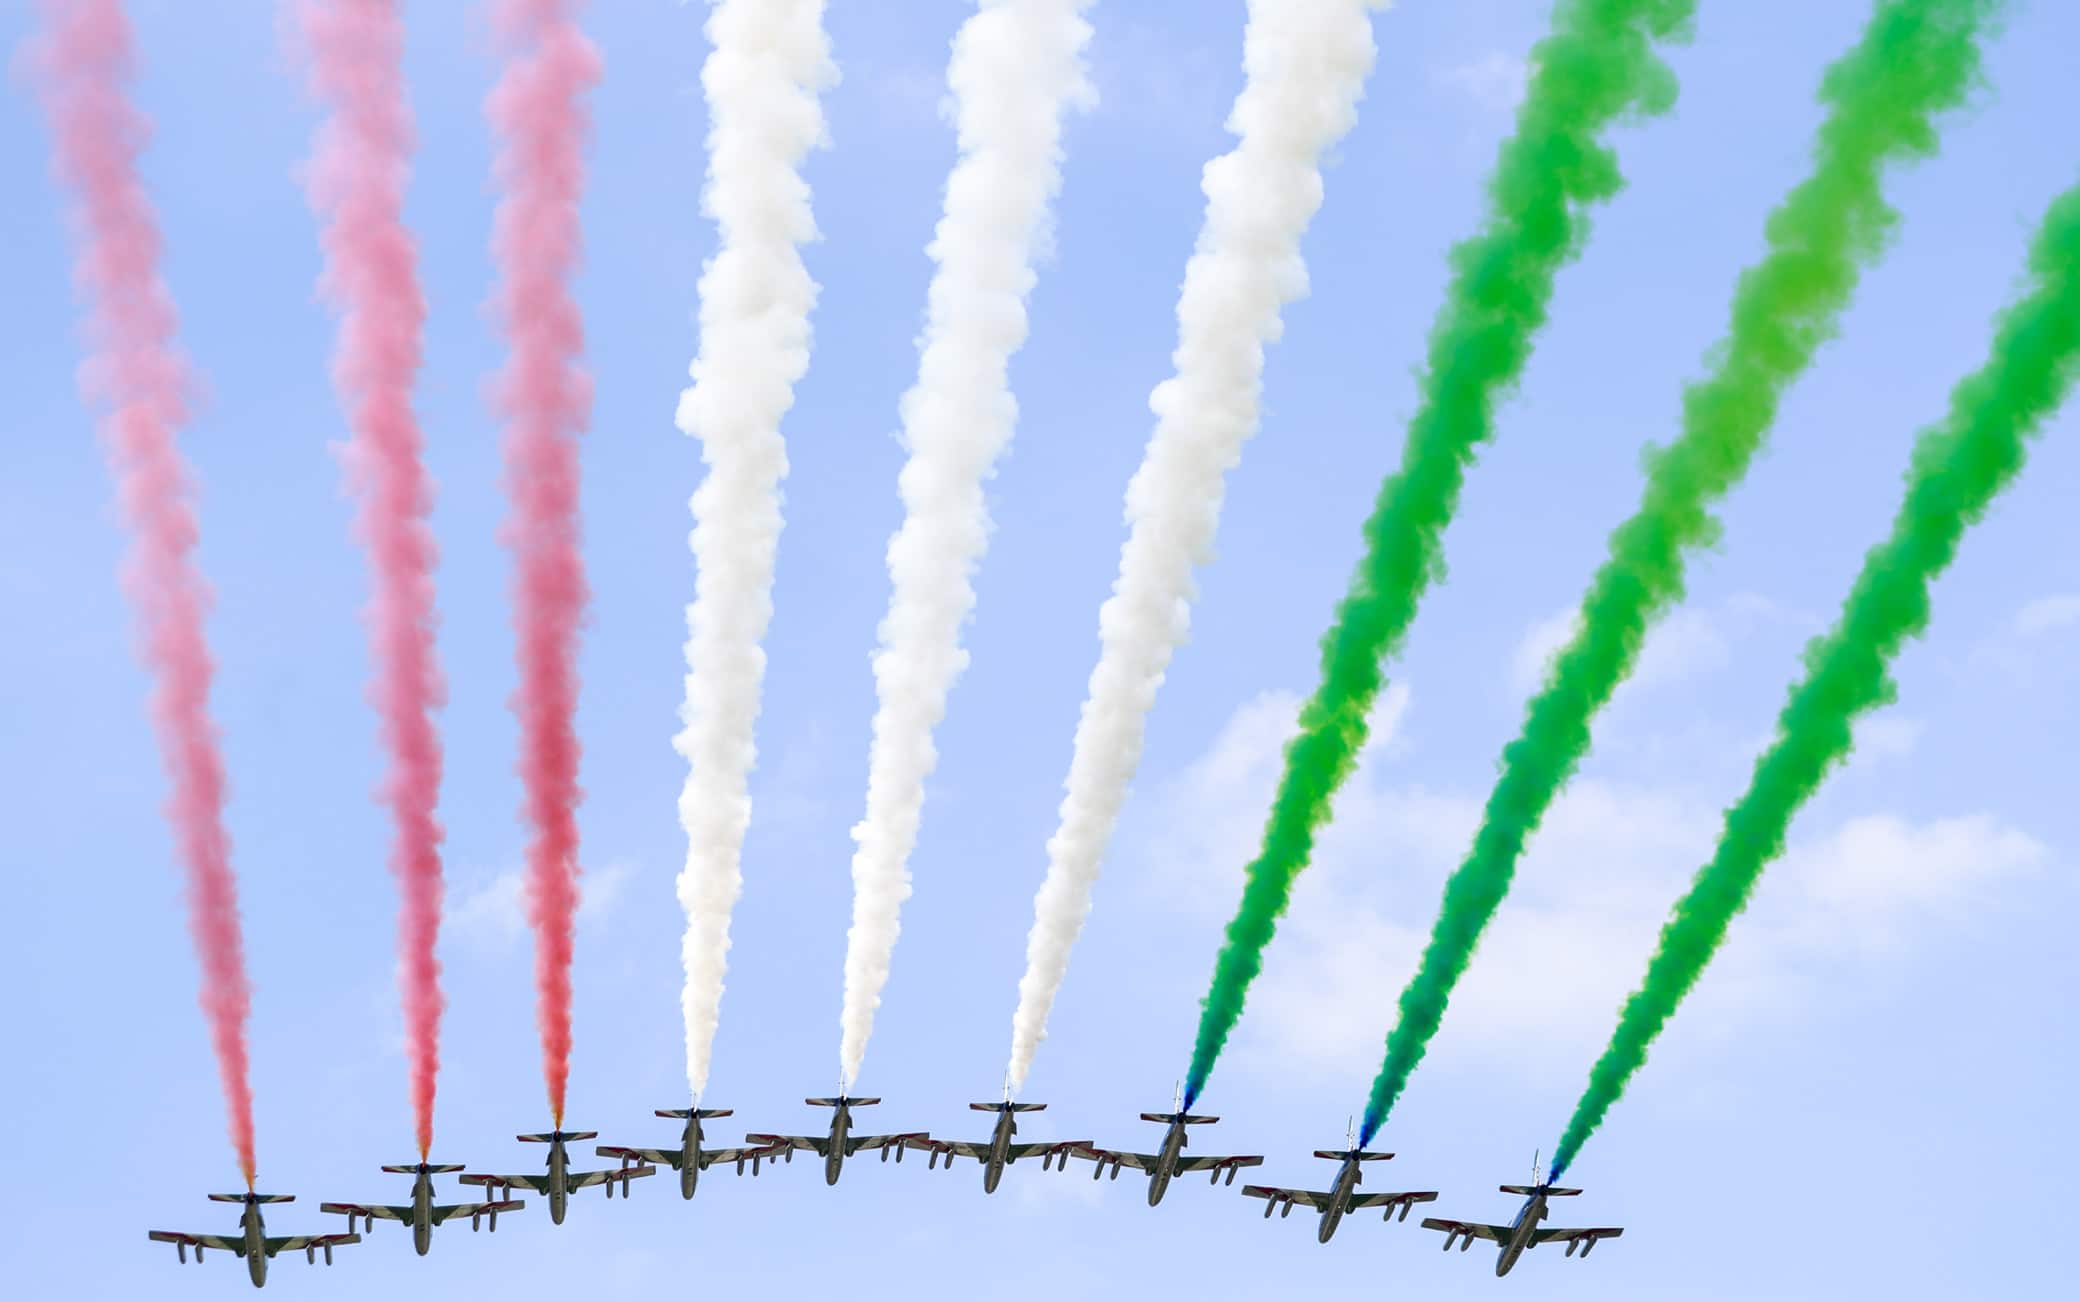 AUTODROMO NAZIONALE MONZA, ITALY - SEPTEMBER 06: The Italian Air Force Aerobatic Display Team, Frecce Tricolori, display over the grid in their Aermacchi MB339A jet trainers during the Italian GP at Autodromo Nazionale Monza on Sunday September 06, 2020 in Monza, Italy. (Photo by Steven Tee / LAT Images)